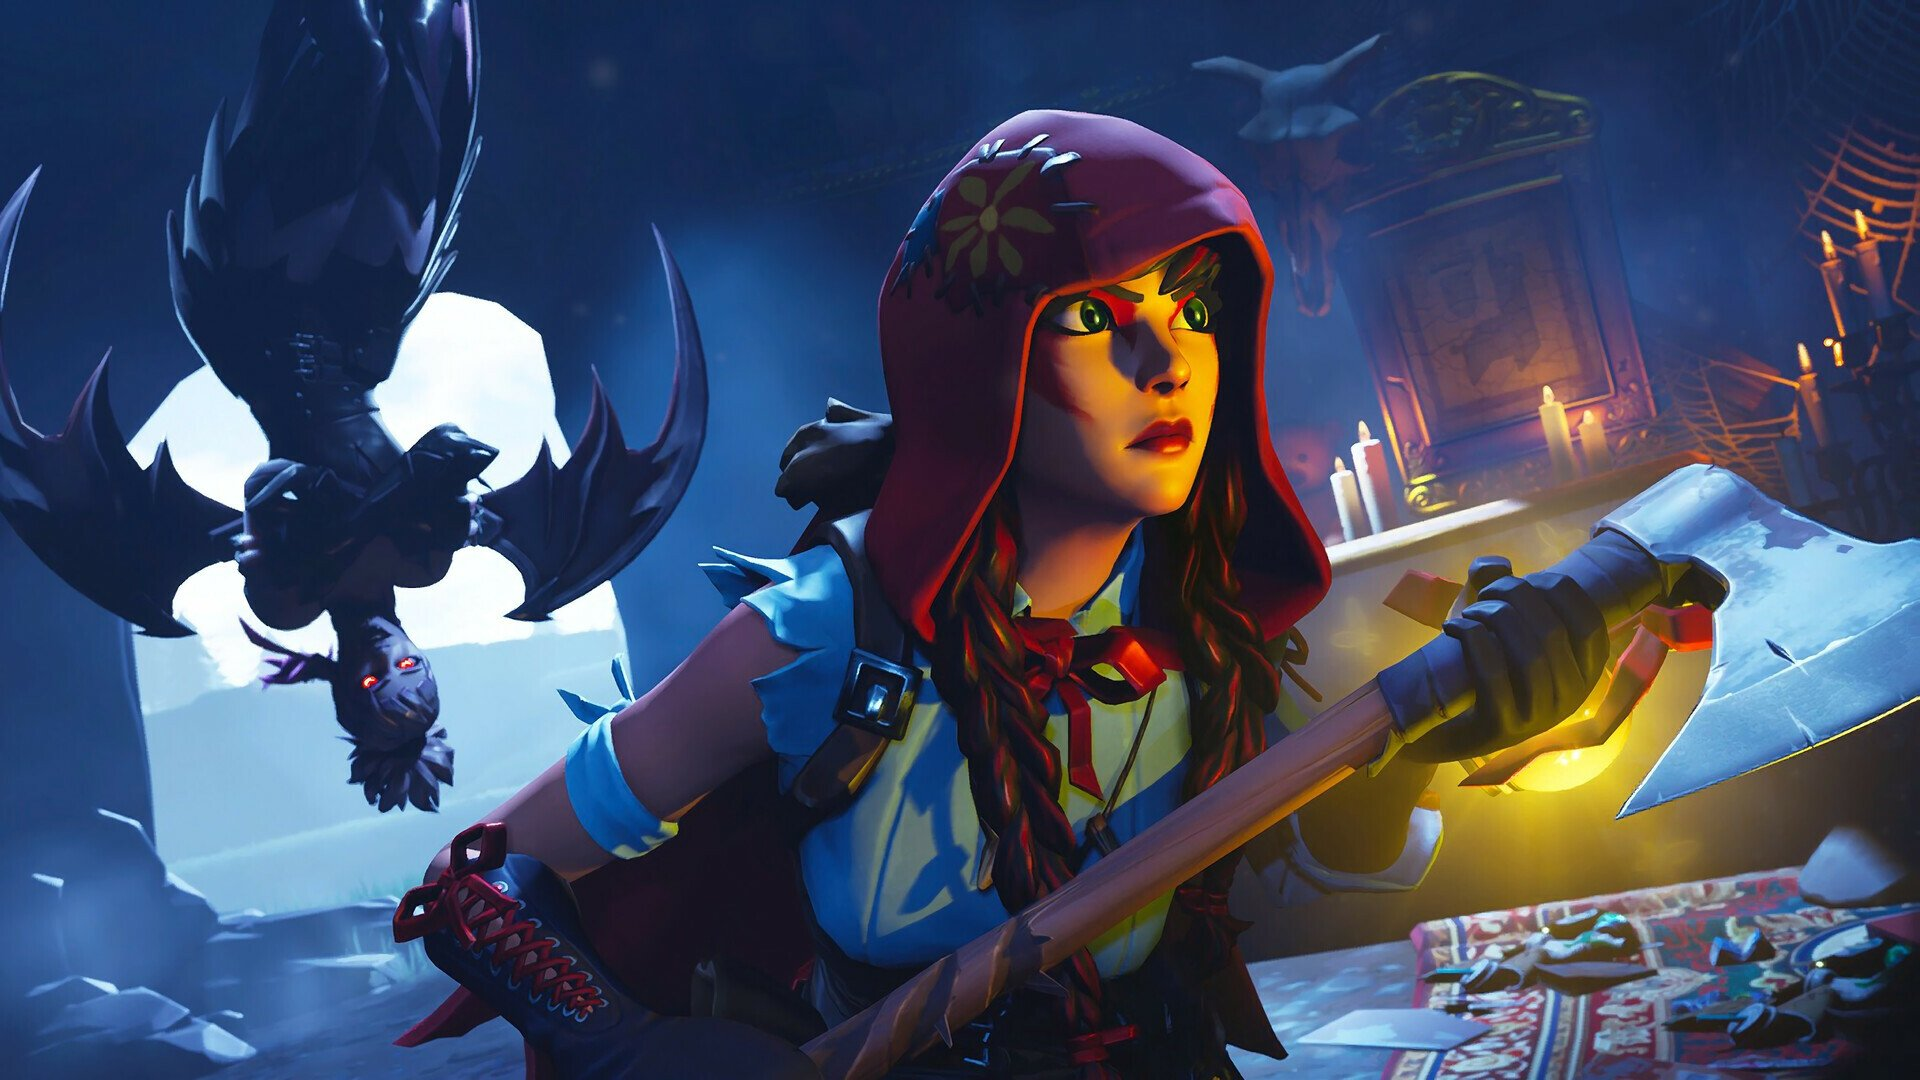 Image of Wendy's avatar in Fortnite